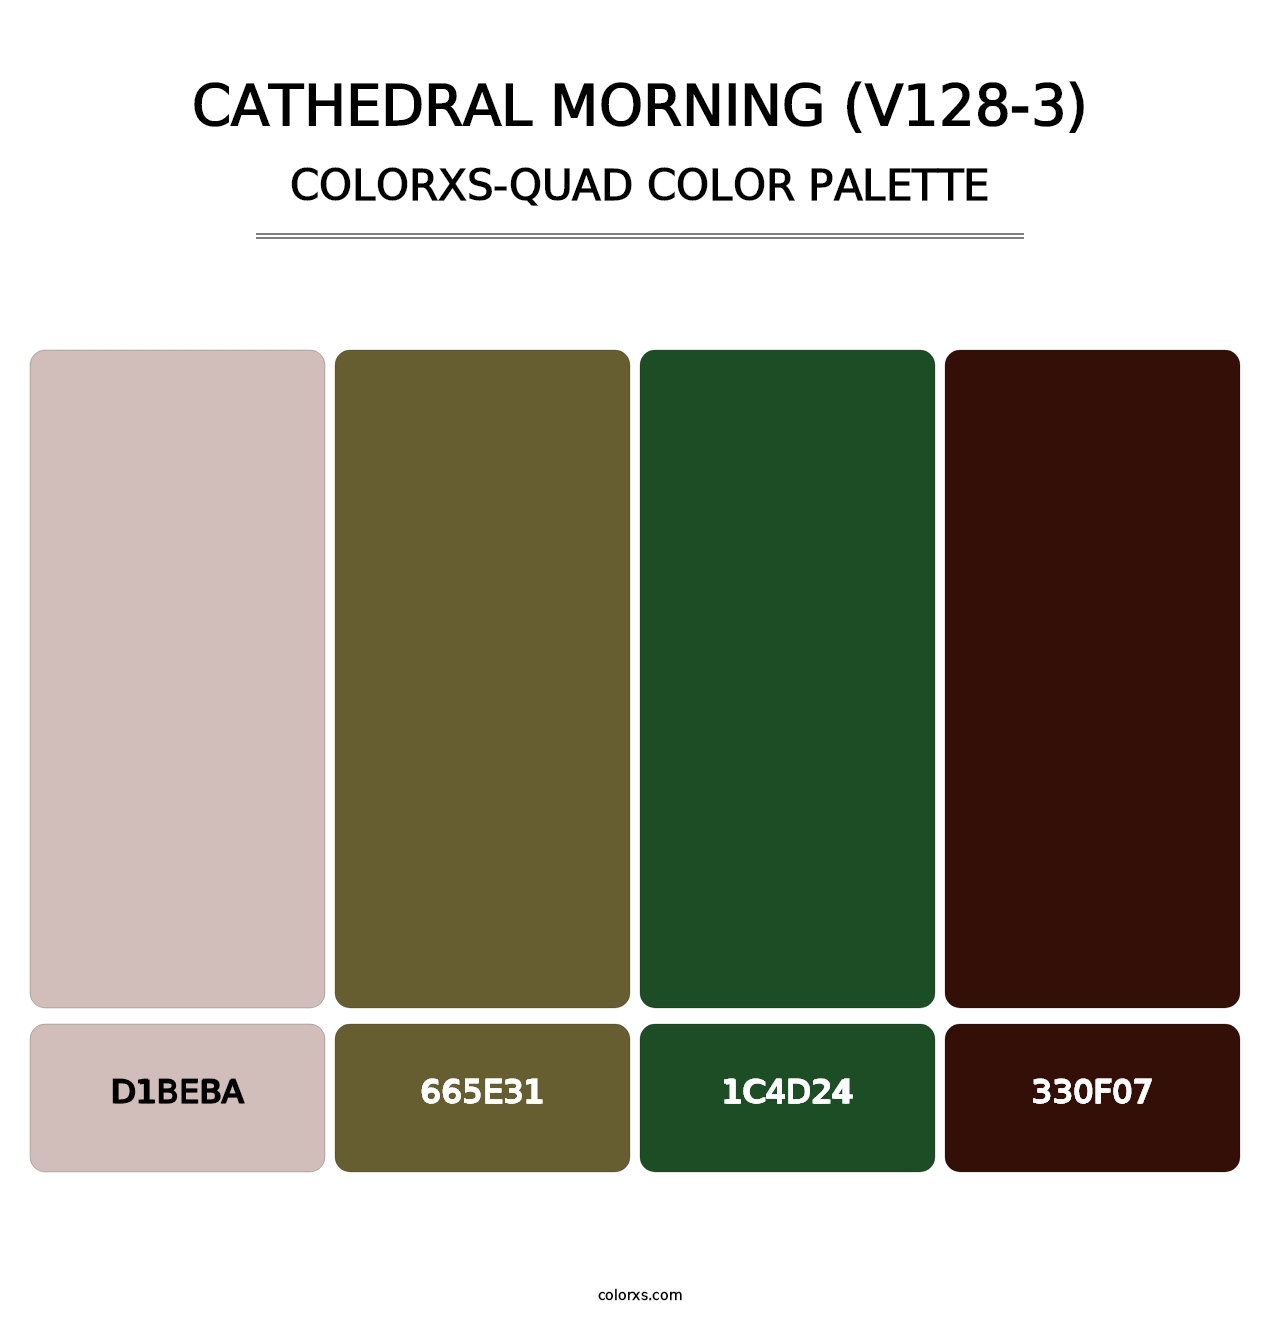 Cathedral Morning (V128-3) - Colorxs Quad Palette